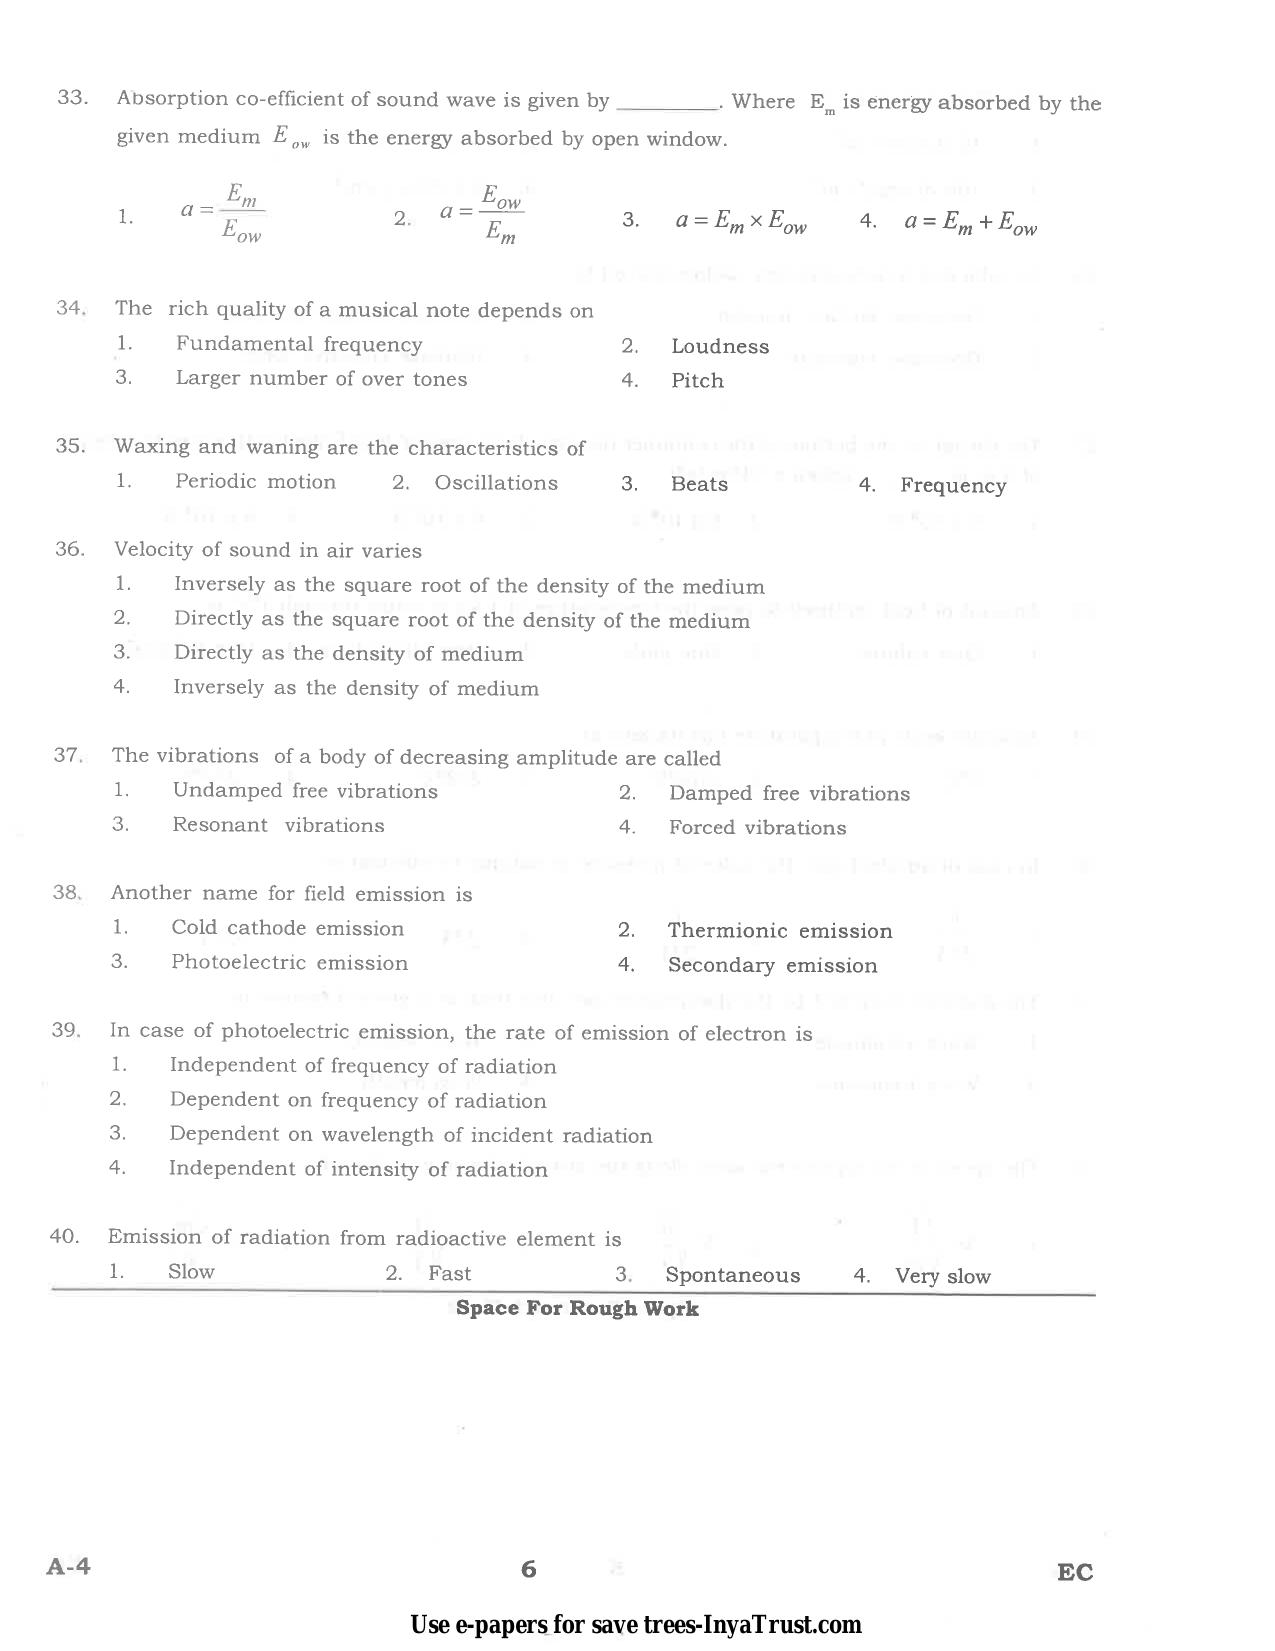 Karnataka Diploma CET- 2015 Electronics and Communication Engineering Question Paper - Page 6